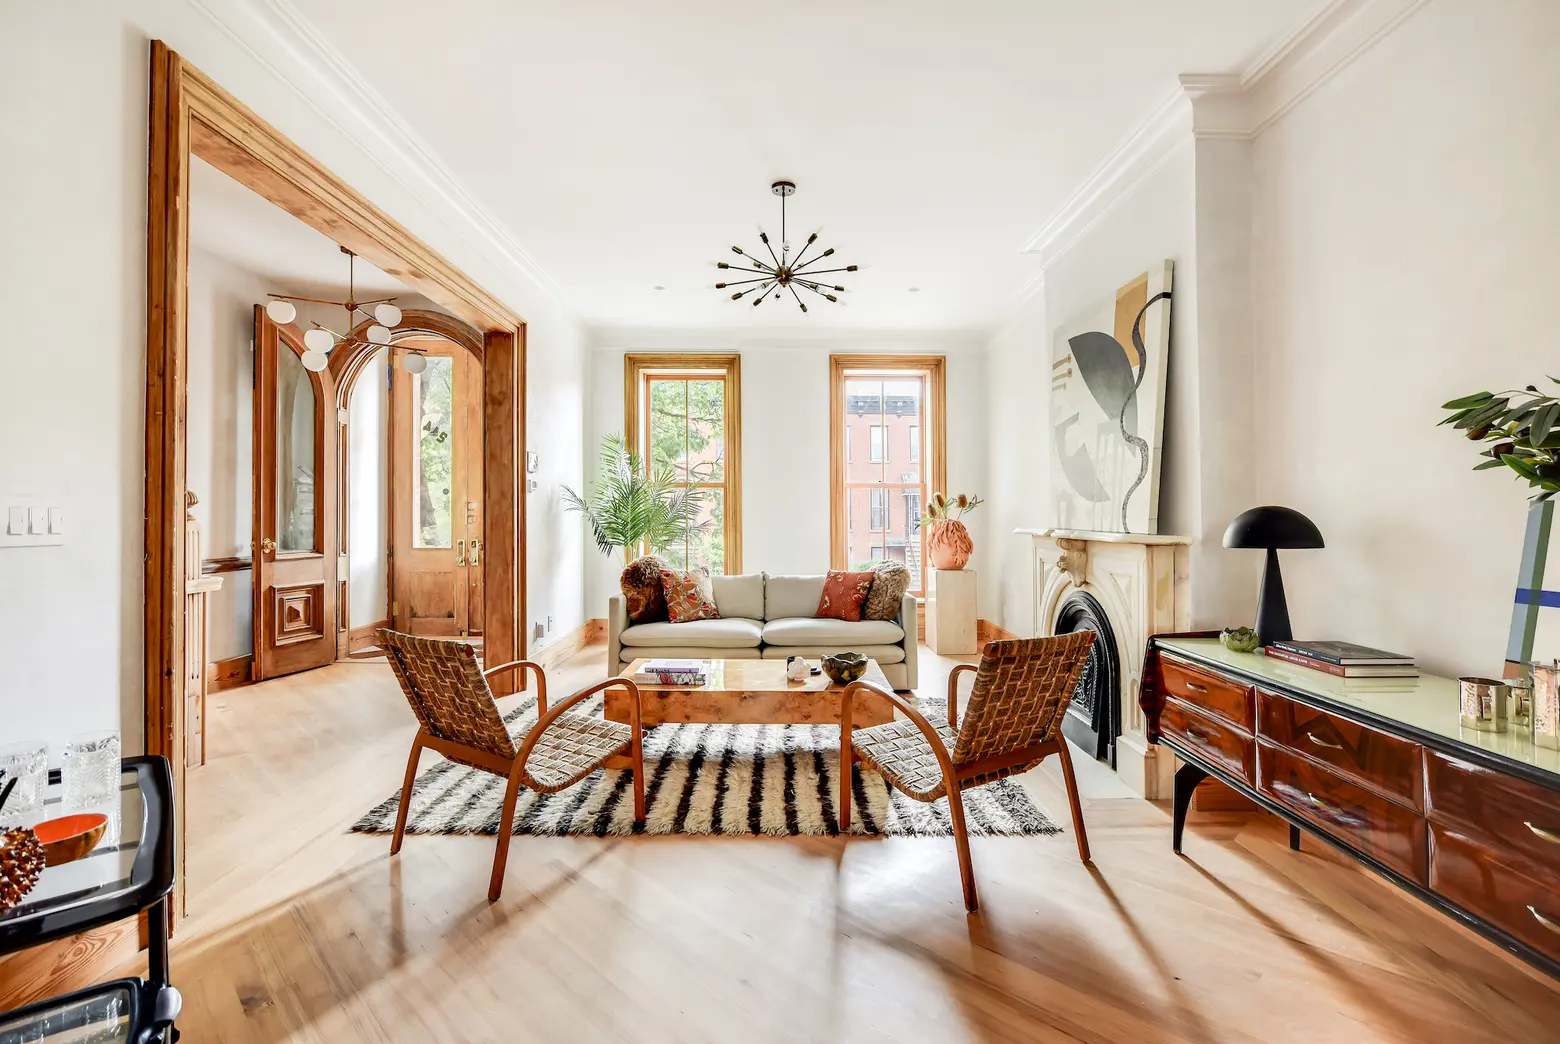 Full of raw materials and Scandinavian style, this Bed-Stuy townhouse is  asking $3.9M